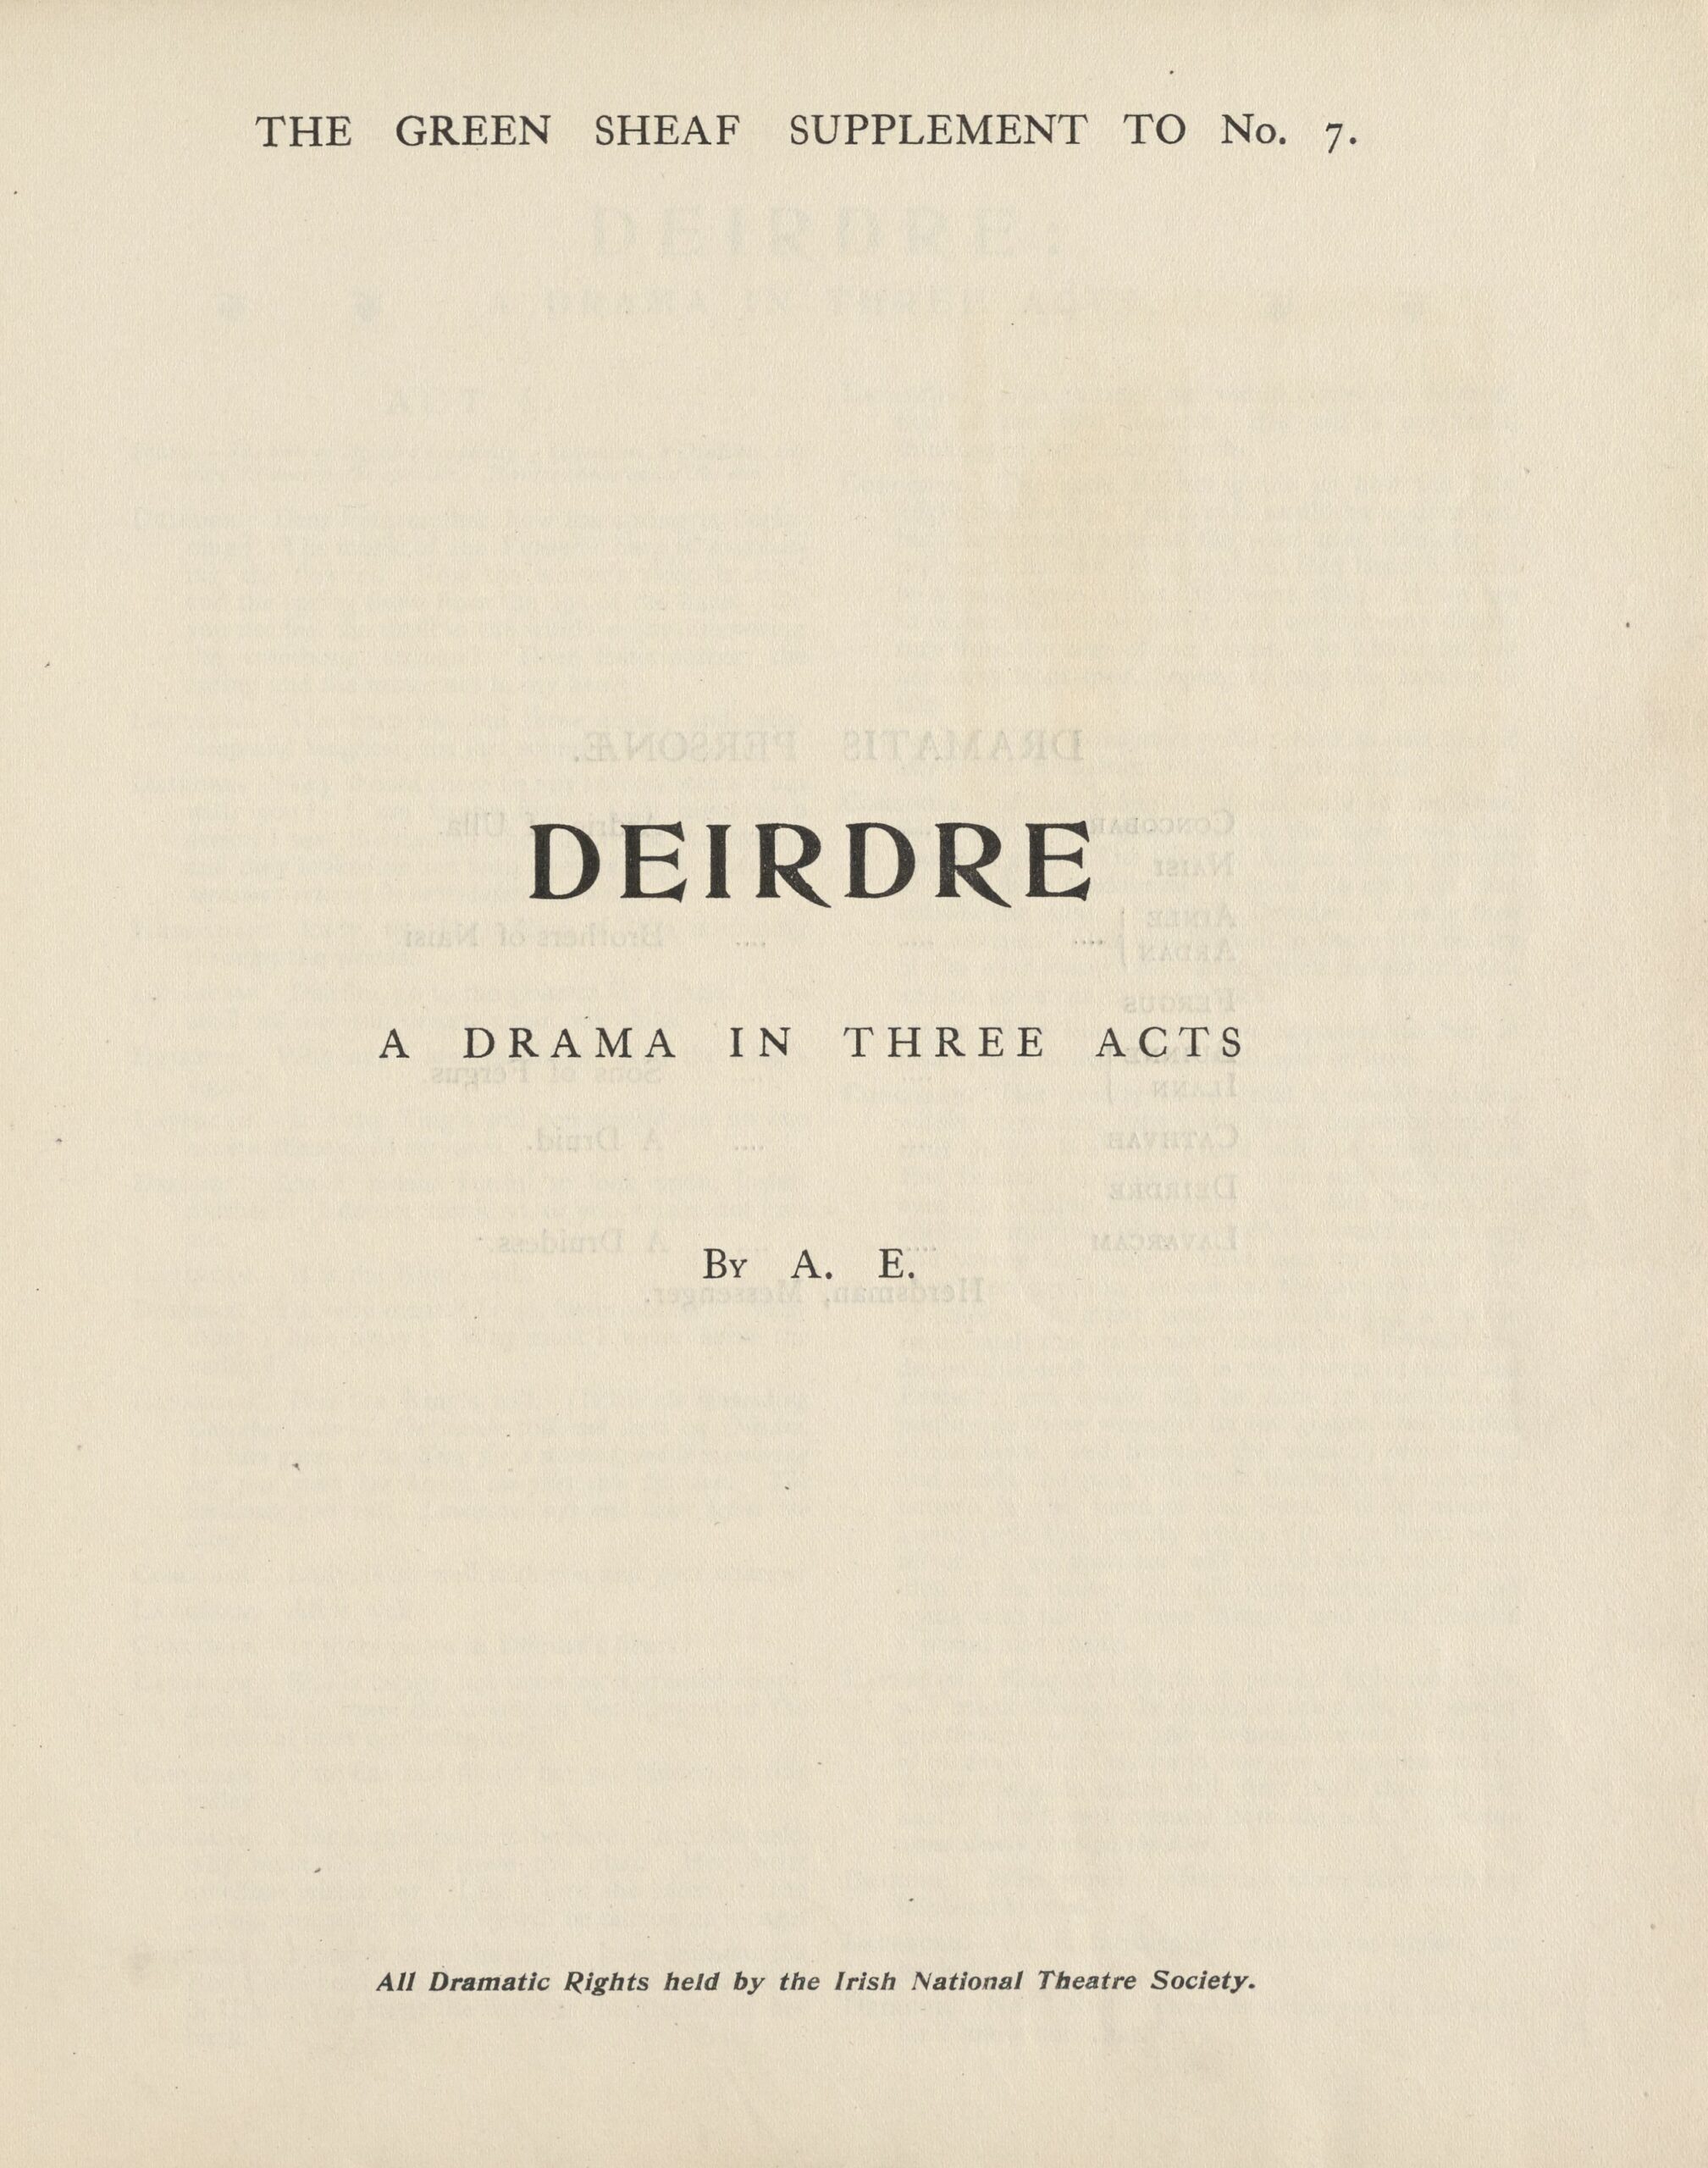 All text on the page is centered. At the very top of the page is printed “THE GREEN SHEAF SUPPLEMENT TO NO. 7.” Below, nearer the middle of the page, “DEIRDRE” is printed in a heavy, stylized serif font. Below that is printed “A DRAMA IN THREE ACTS / BY A. E.” At the bottom of the page, in italics, is printed “All Dramatic Rights held by the Irish National Theatre Society.”